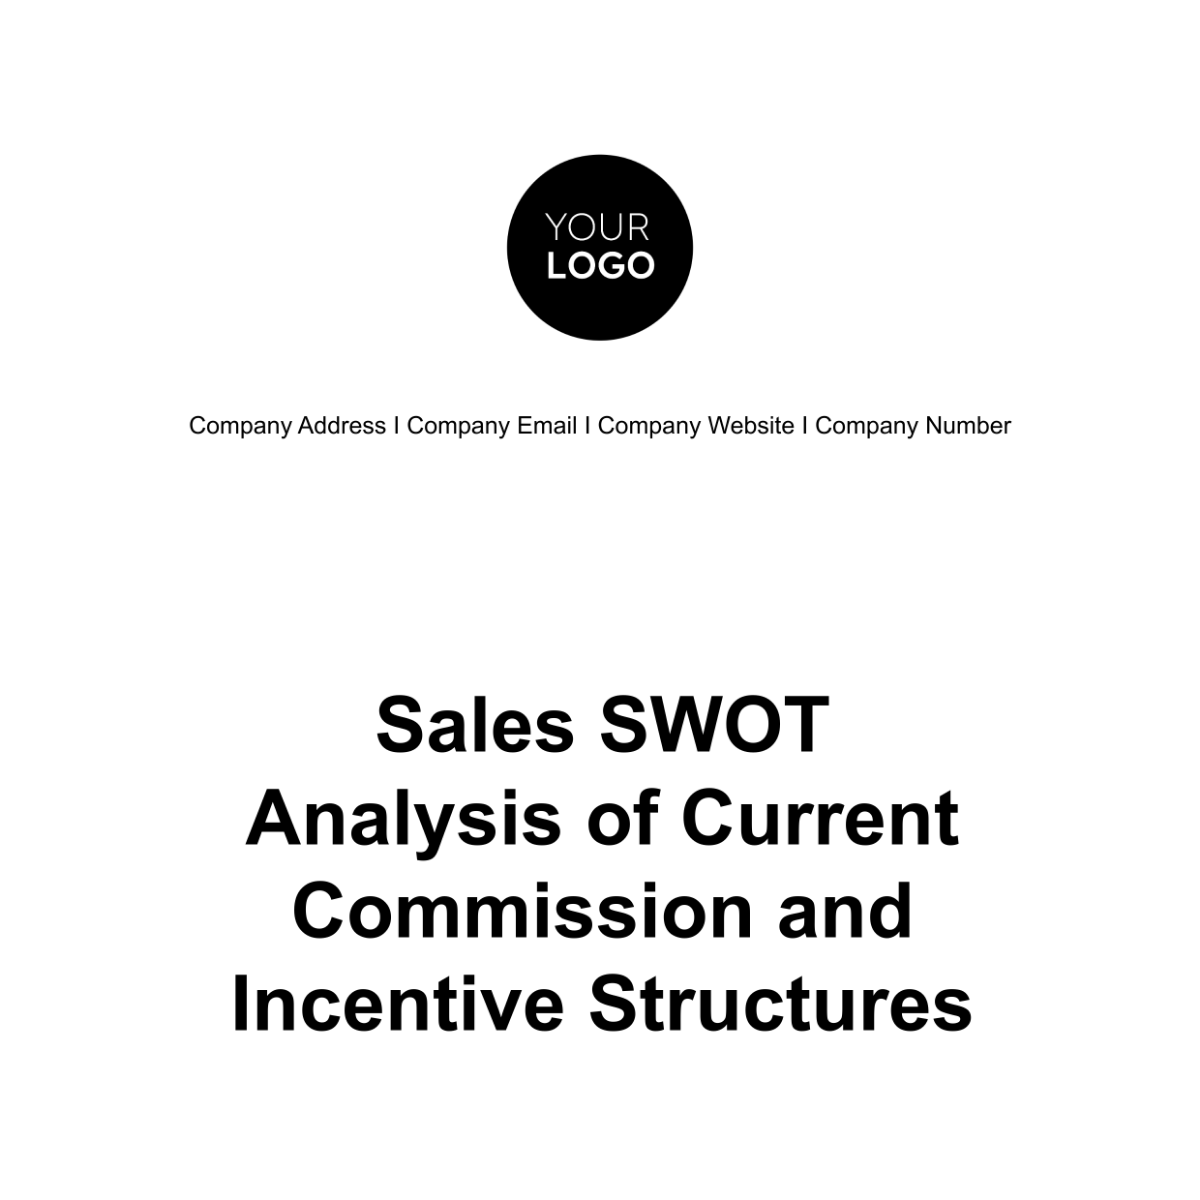 Sales SWOT Analysis of Current Commission and Incentive Structures Template